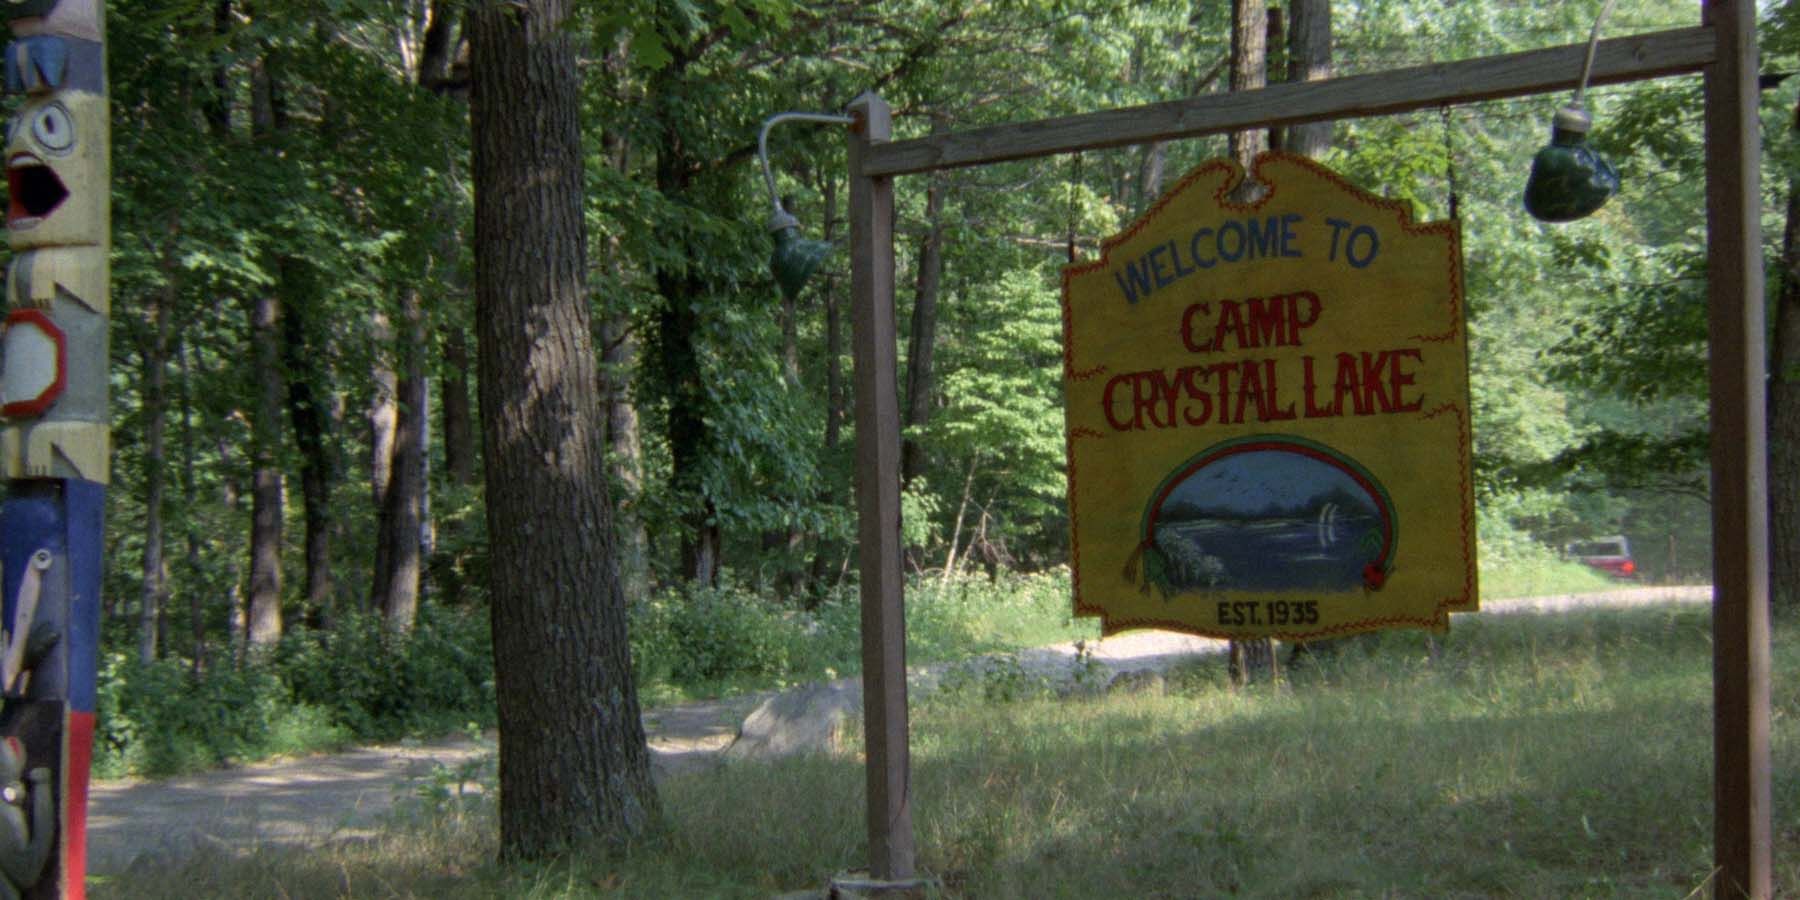 The Camp Crystal Lake sign outside in Friday The 13th (1980)